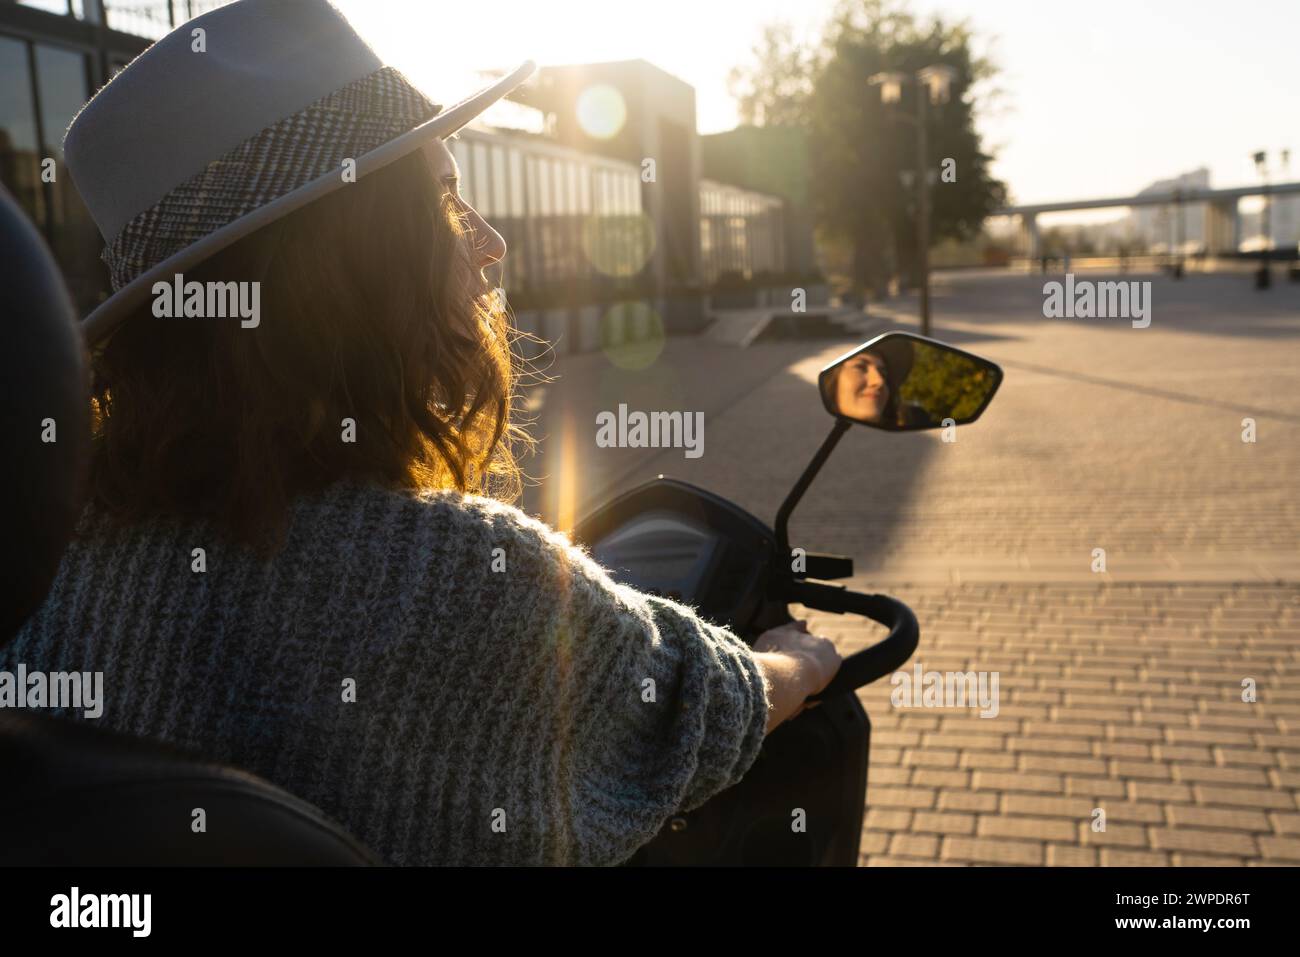 Woman tourist on a four wheel mobility electric scooter on a city street. The woman's face is visible in the rearview mirror. Stock Photo